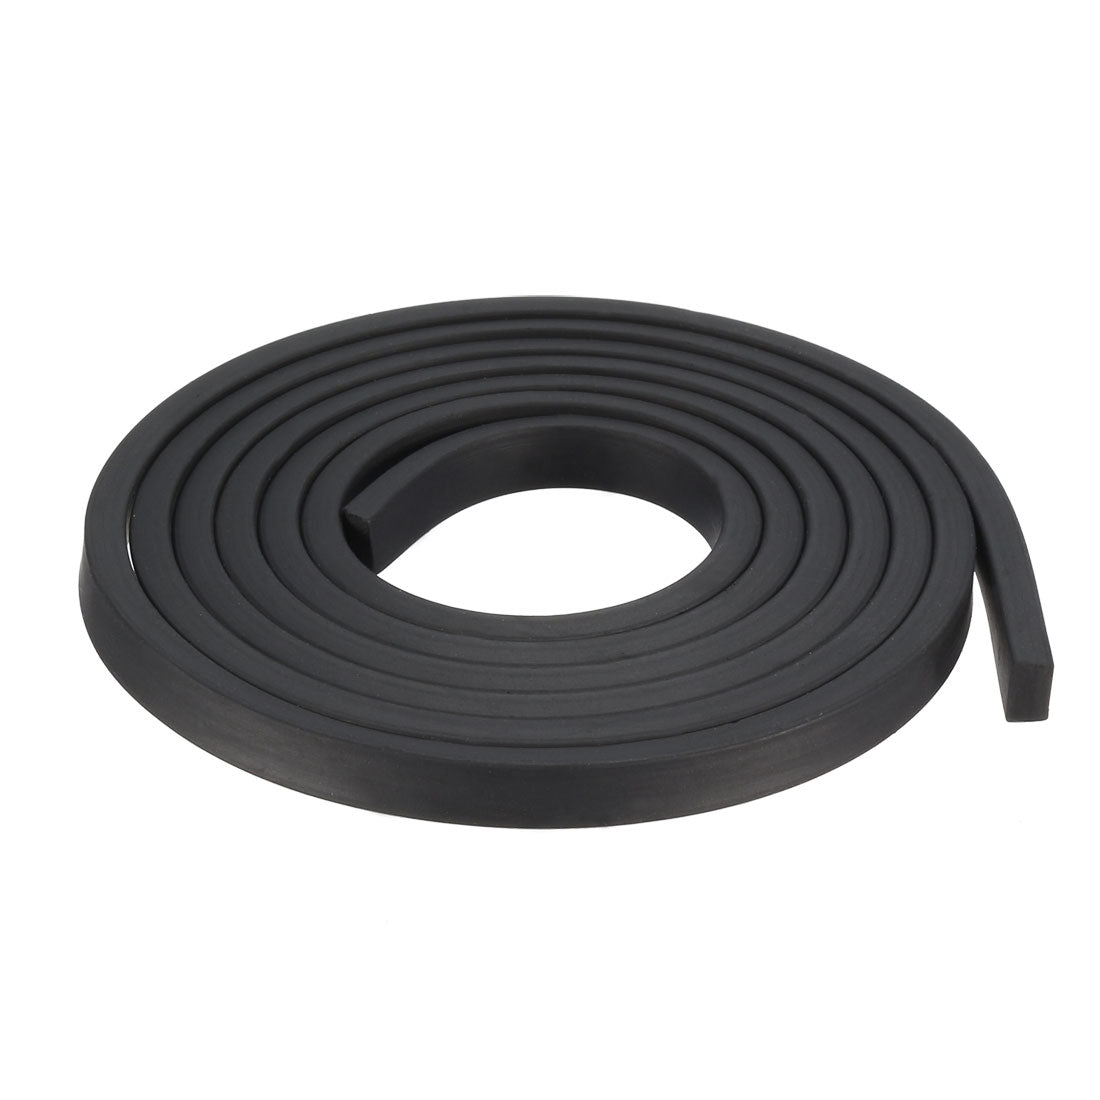 uxcell Uxcell Solid Rectangle Rubber Seal Strip 5mm Wide 3mm Thick, 1 Meter Long Black